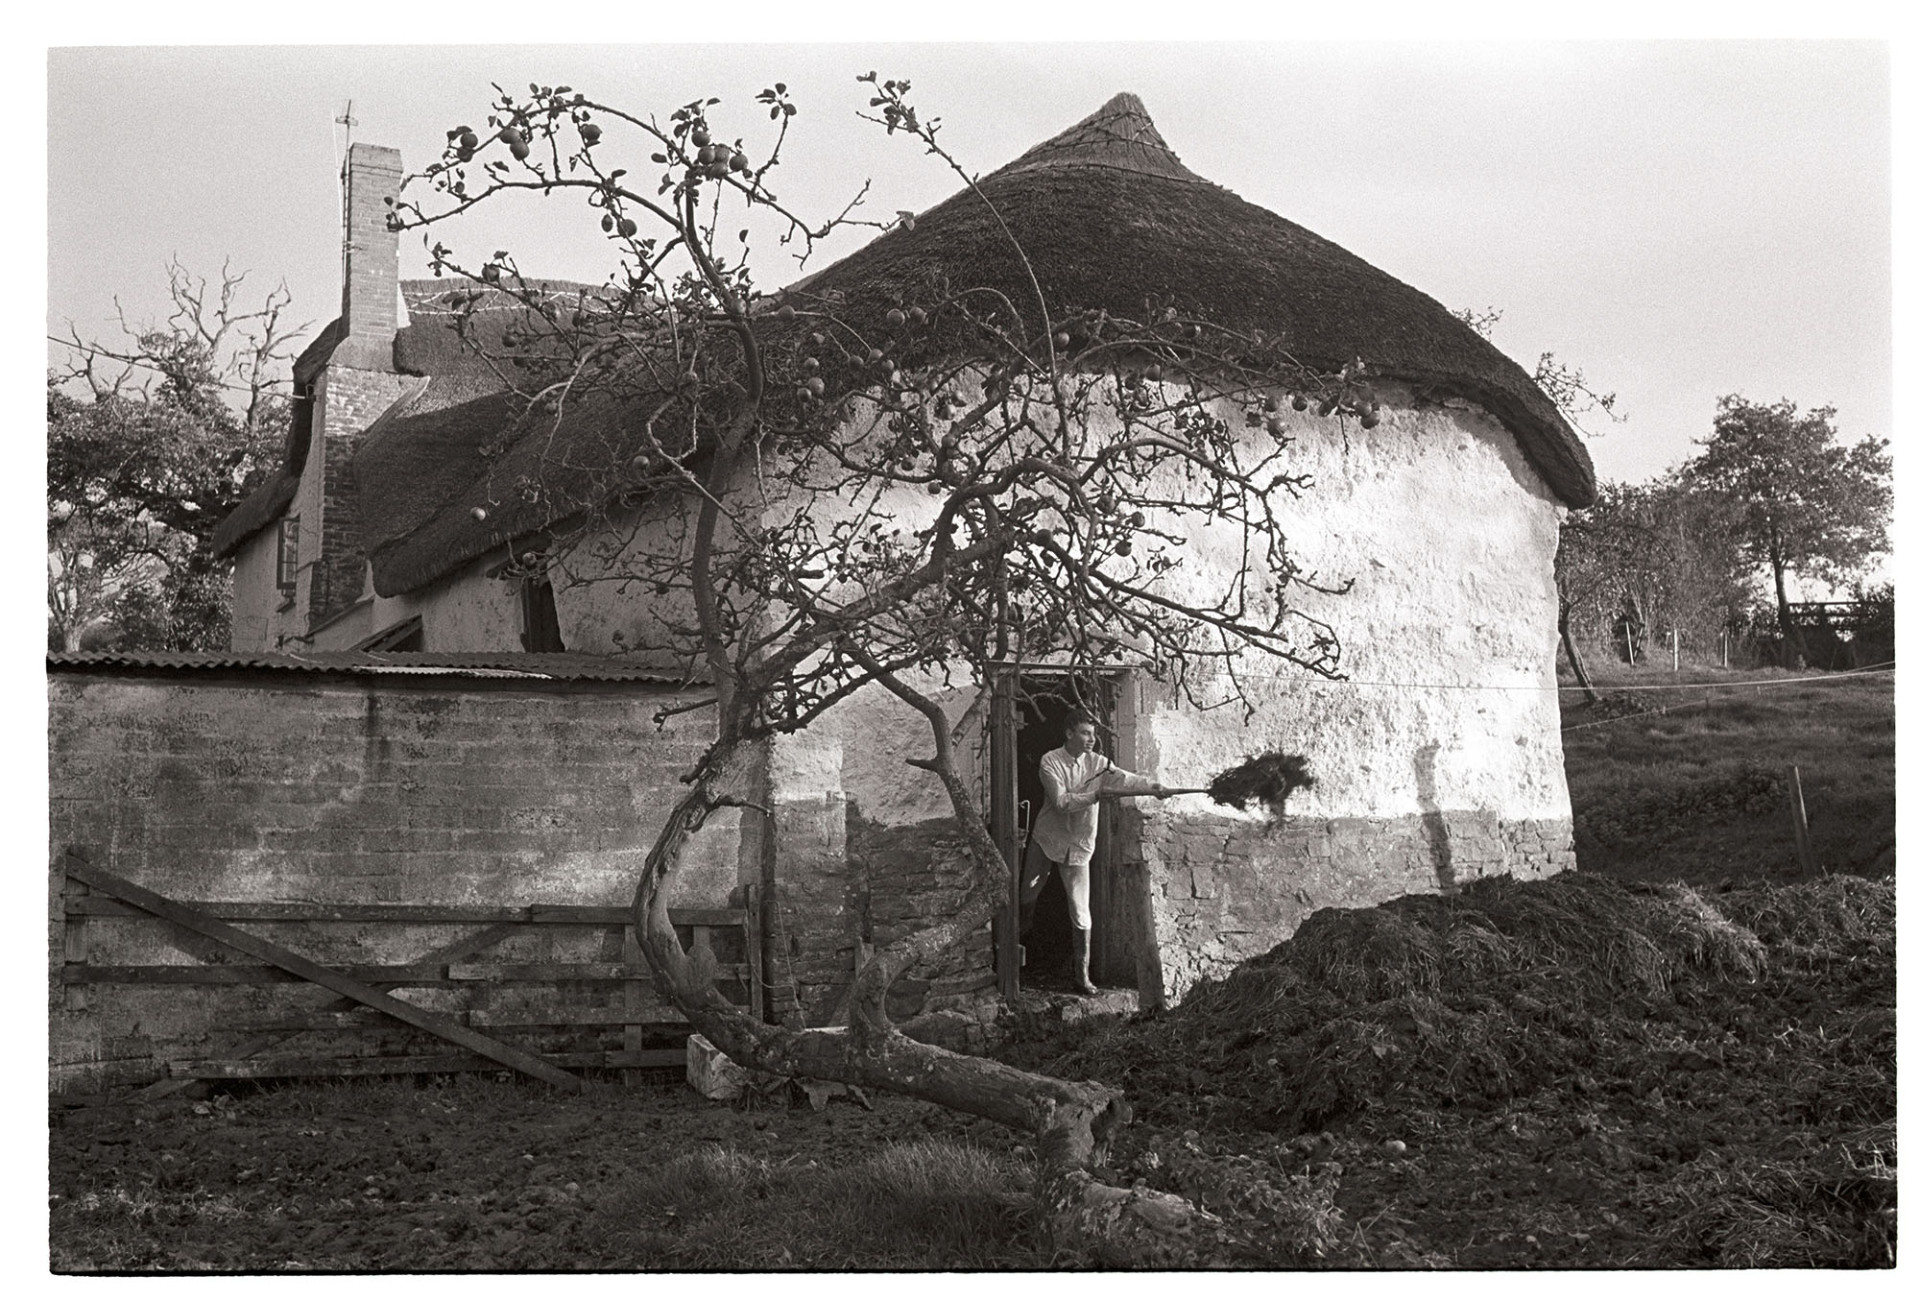 Remains of orchard in front of cob and thatch farmhouse mucking out, manure heap. 
[A man mucking out a cob and thatch barn attached to a farmhouse at South Ash, Kings Nympton. The remains of an orchard with a single apple tree is in front of the barn.]